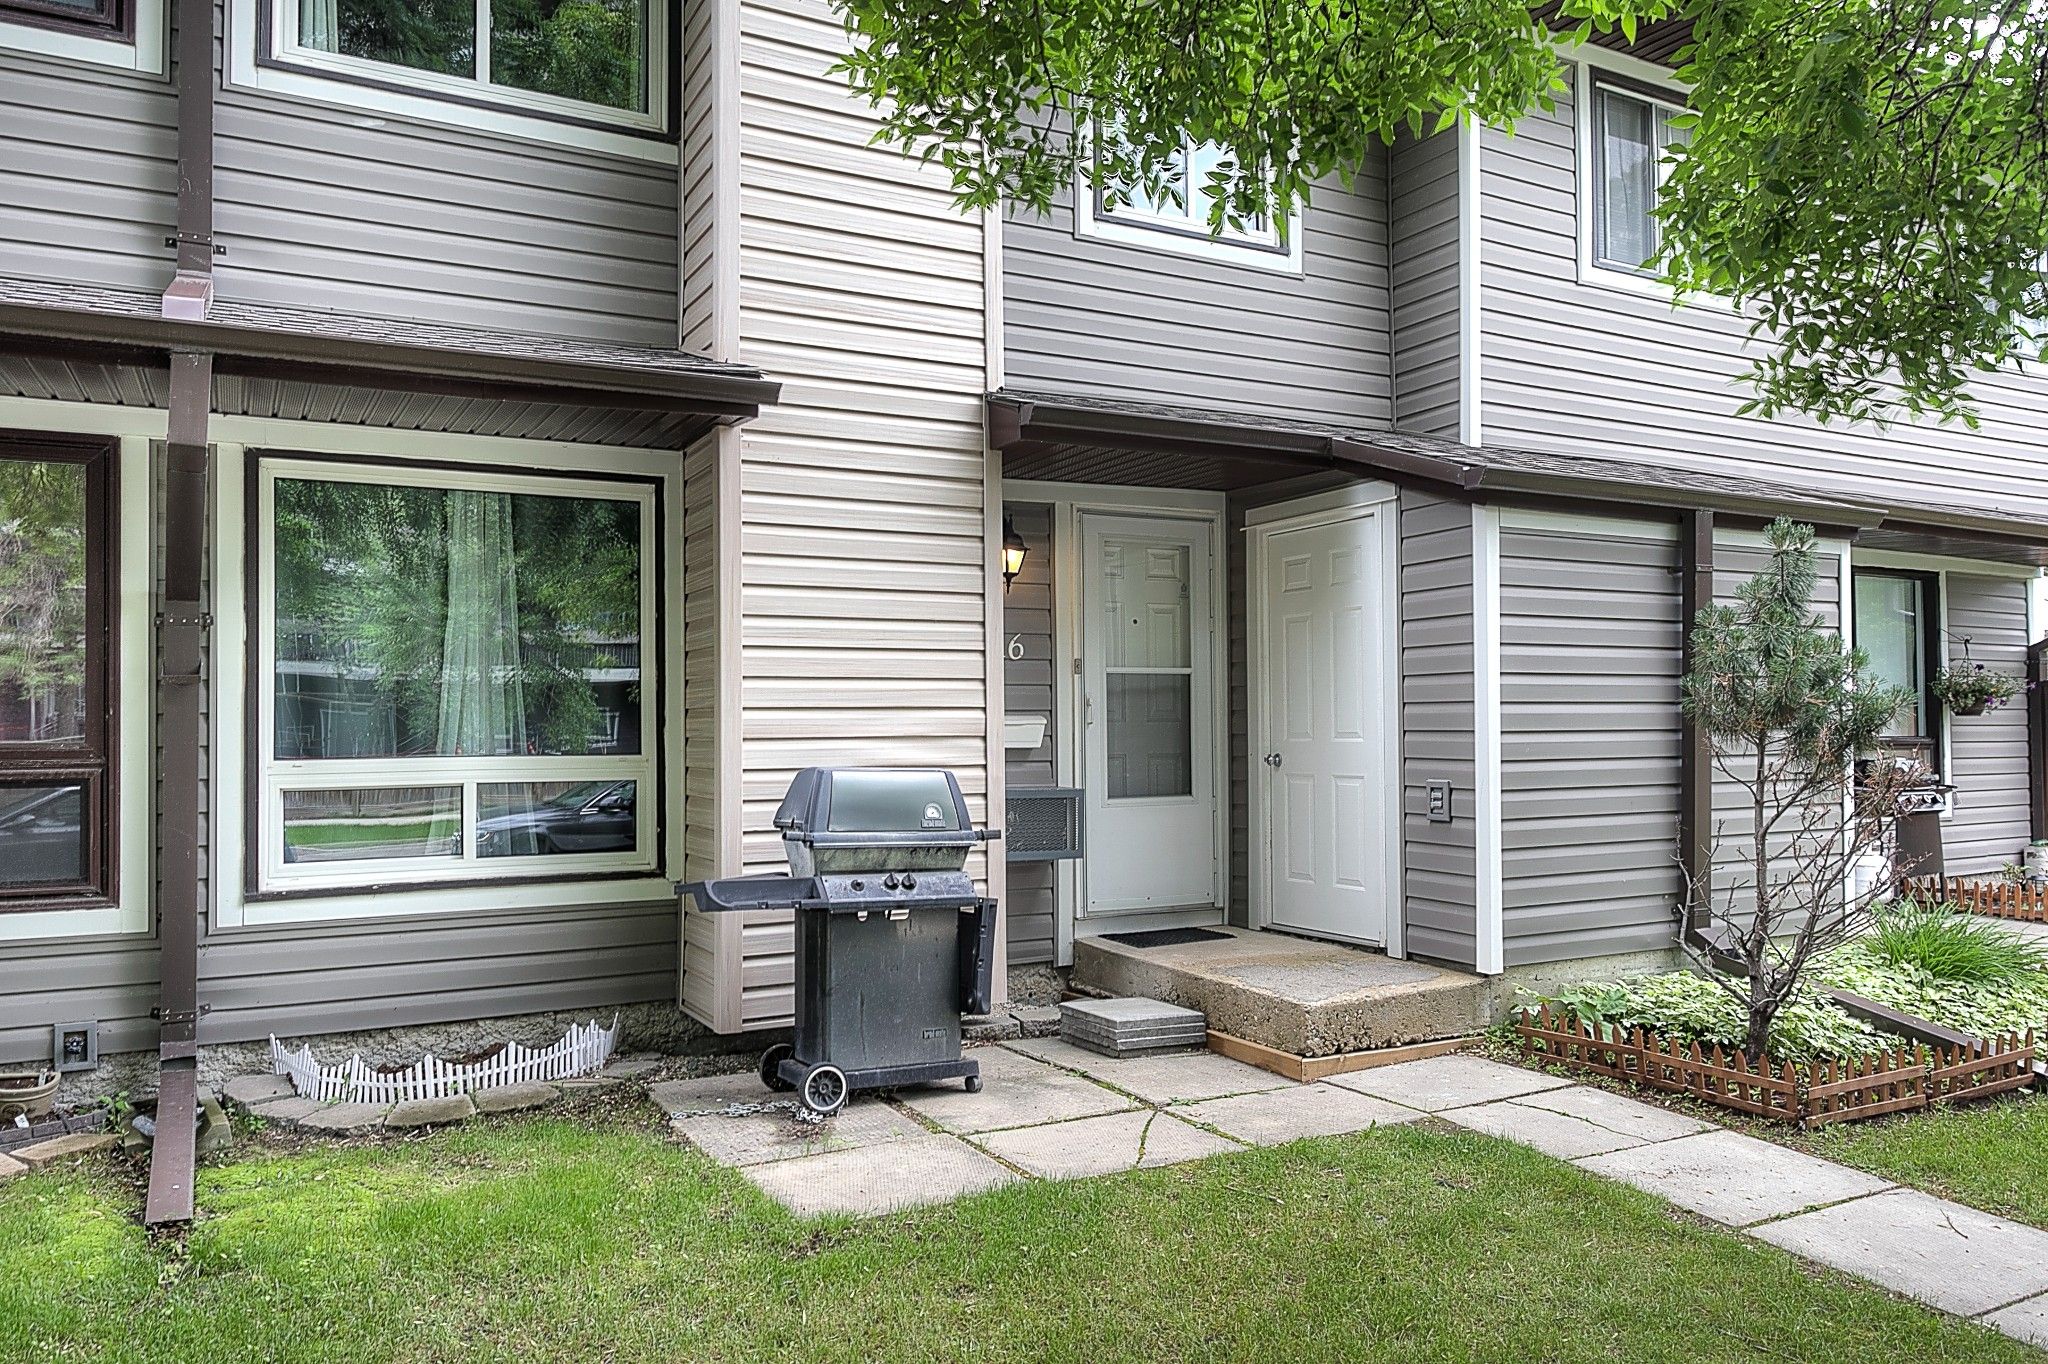 Main Photo: 116 3907 Grant Ave in Winnipeg: Charleswood Townhouse for sale (1G)  : MLS®# 202216185